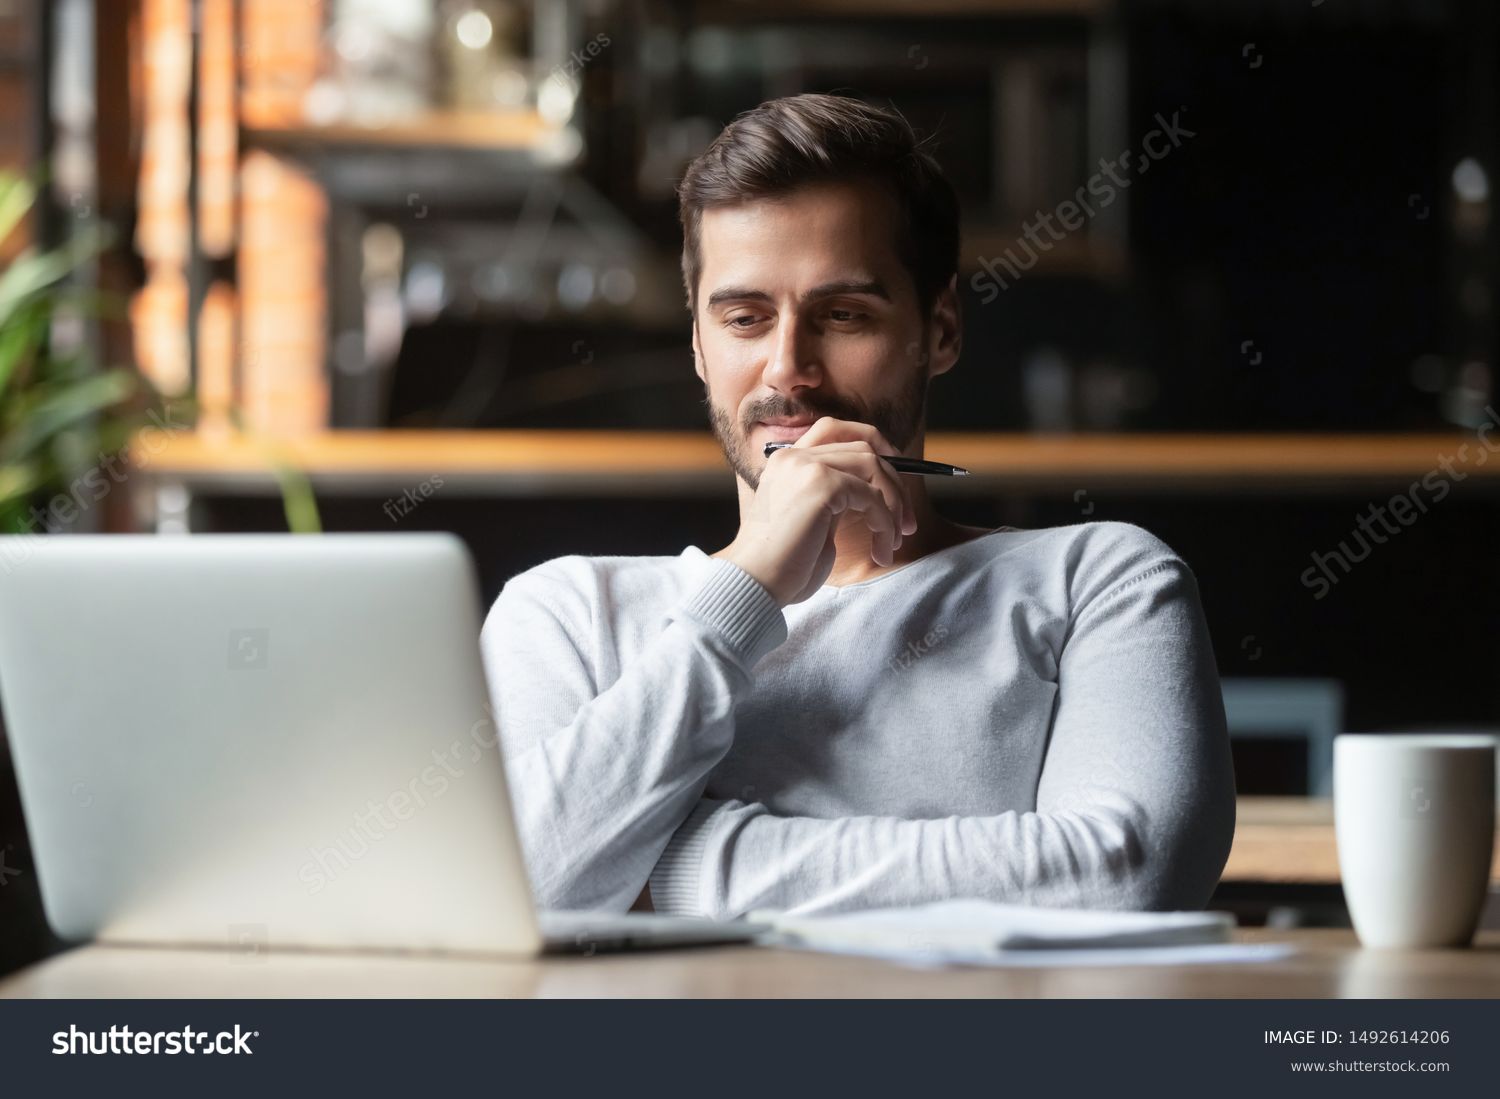 Thoughtful businessman think of online project looking at laptop at workplace, dreamy professional consider solution sit at work desk with computer, student search new idea inspiration in office cafe #1492614206